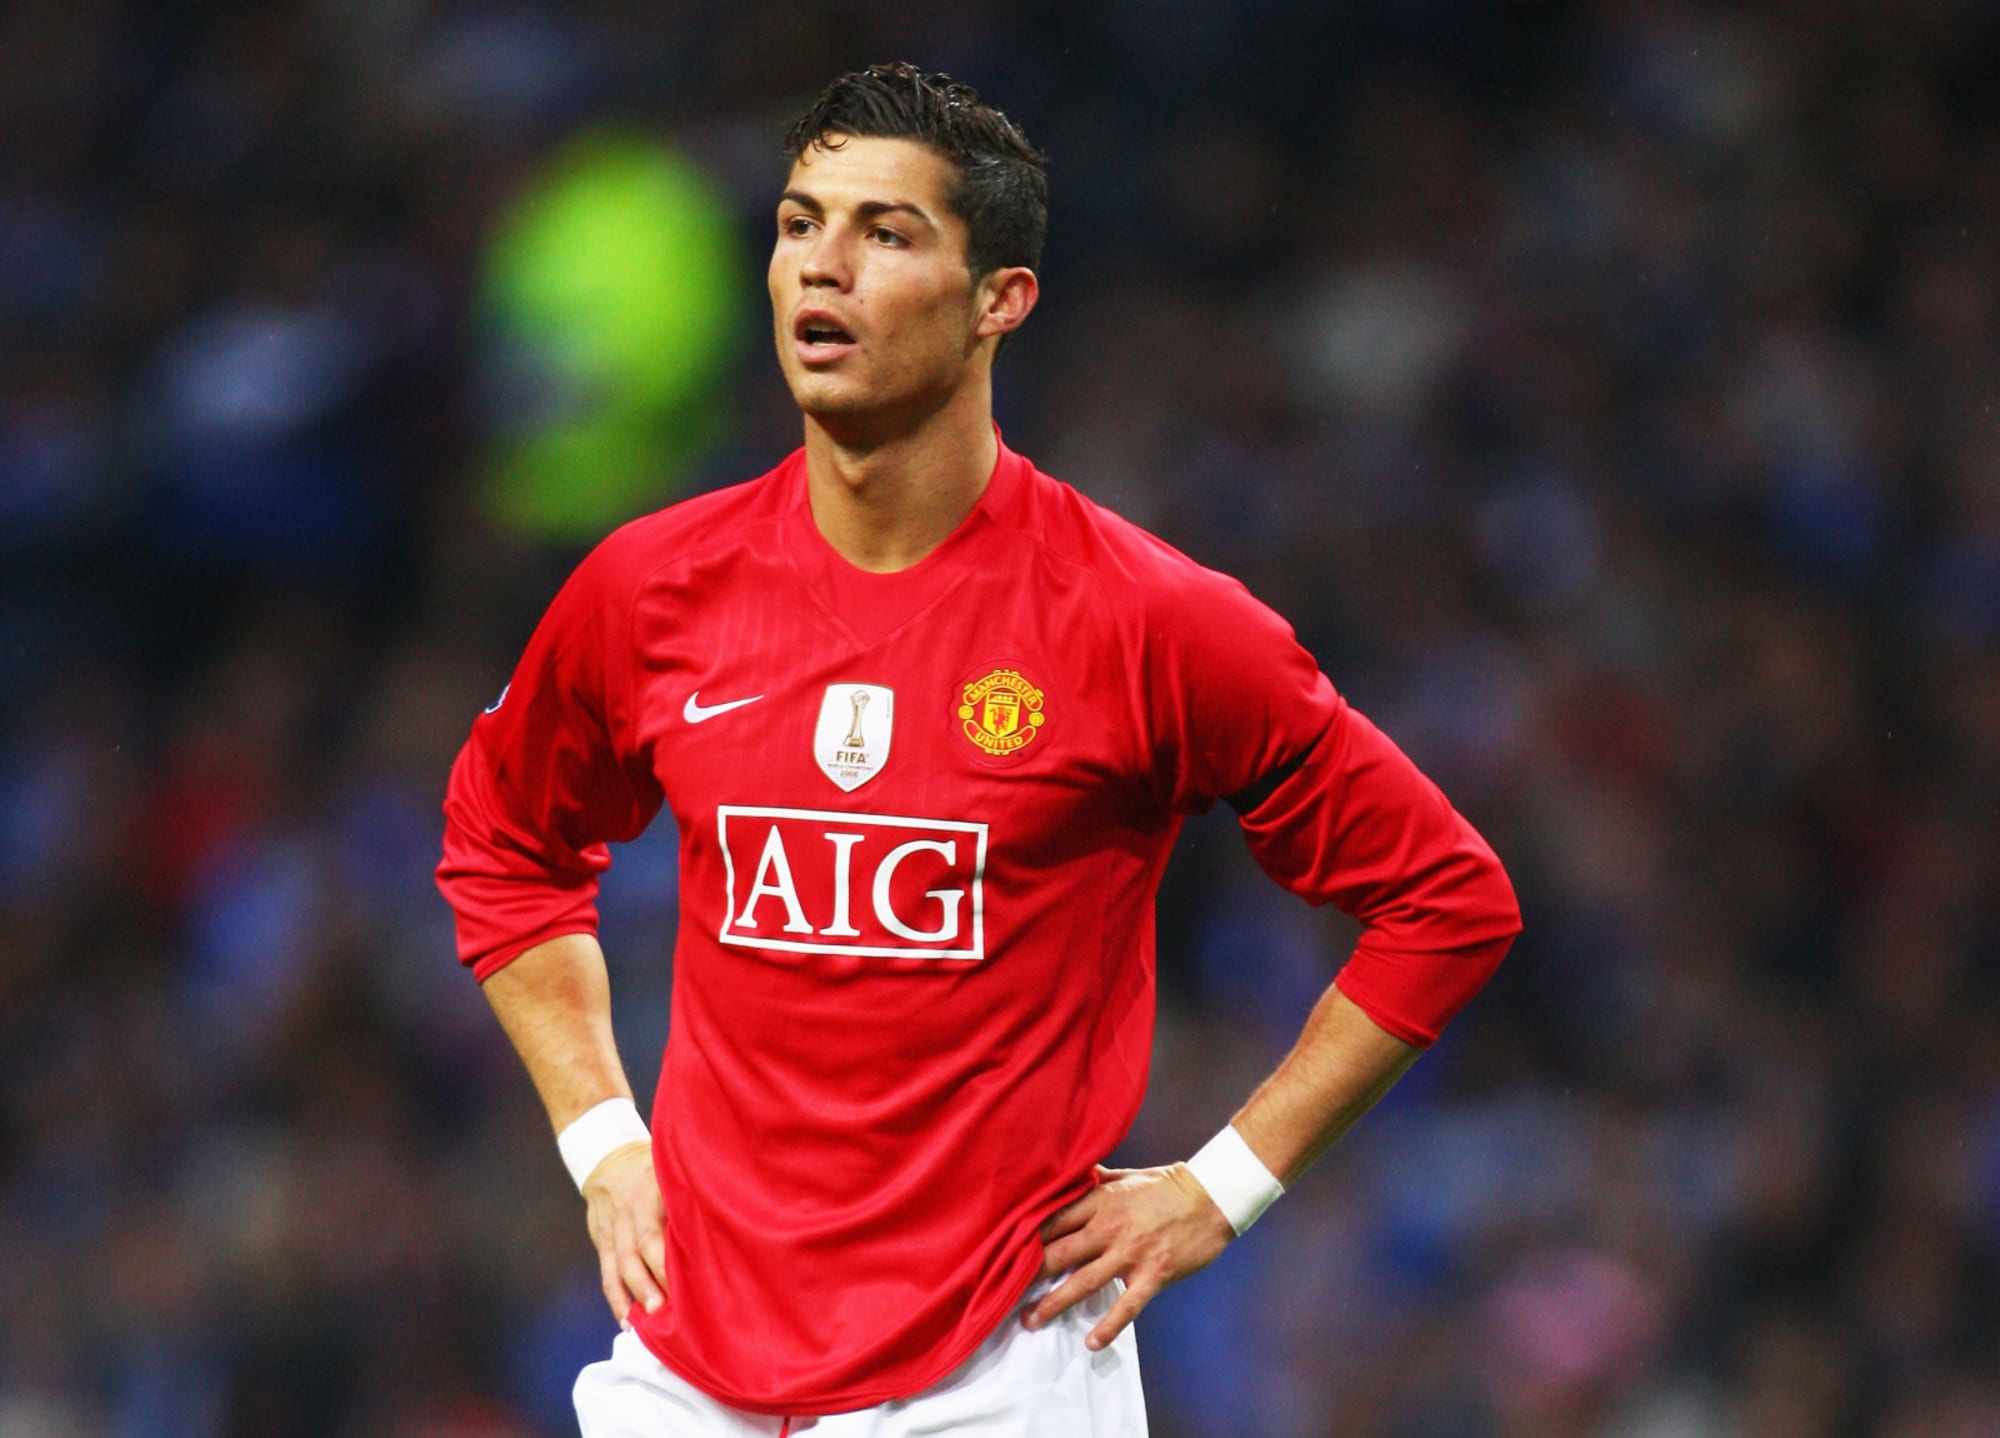 Mads Timm reveals that Cristiano Ronaldo was bullied when he